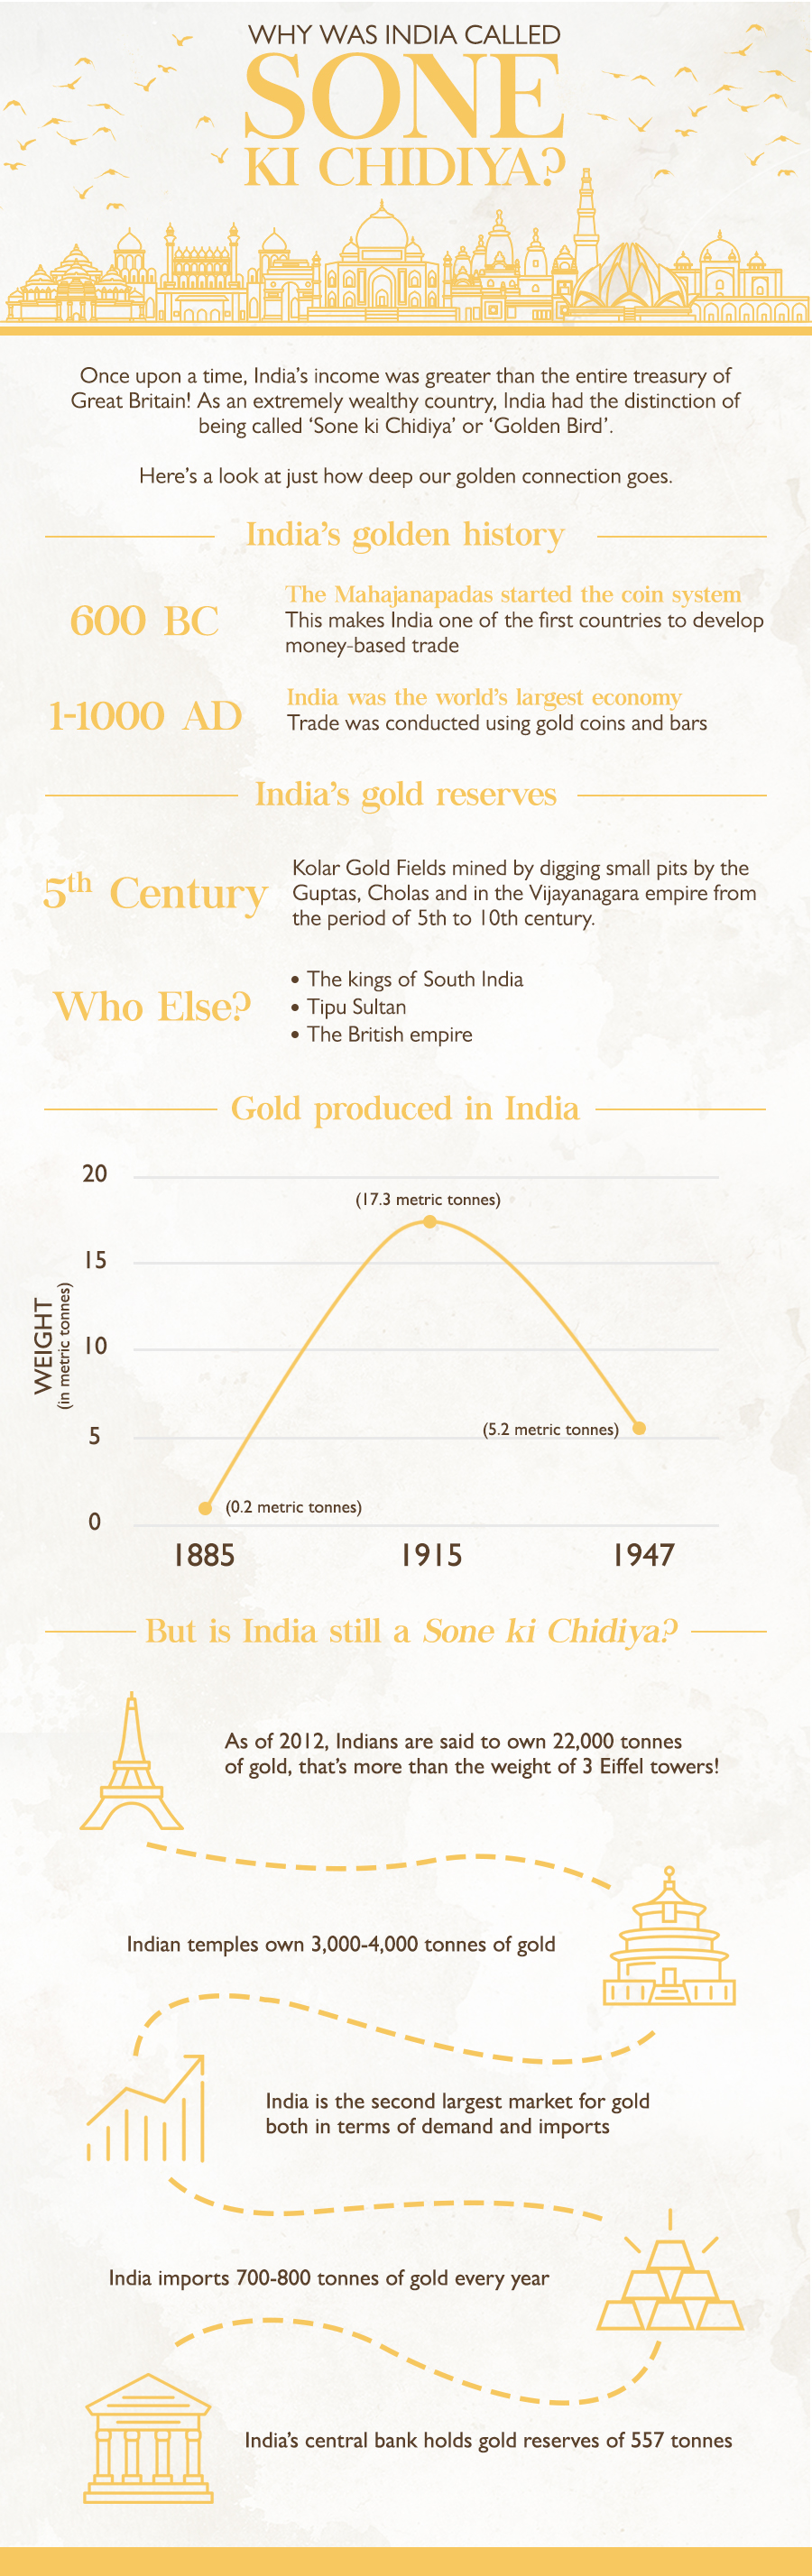 India was named 'Sone Ki Chidiya' in ancient times because of the abundance of gold in the country. Here's a look into our connection with gold and why is India still sometimes called The Golden Bird.